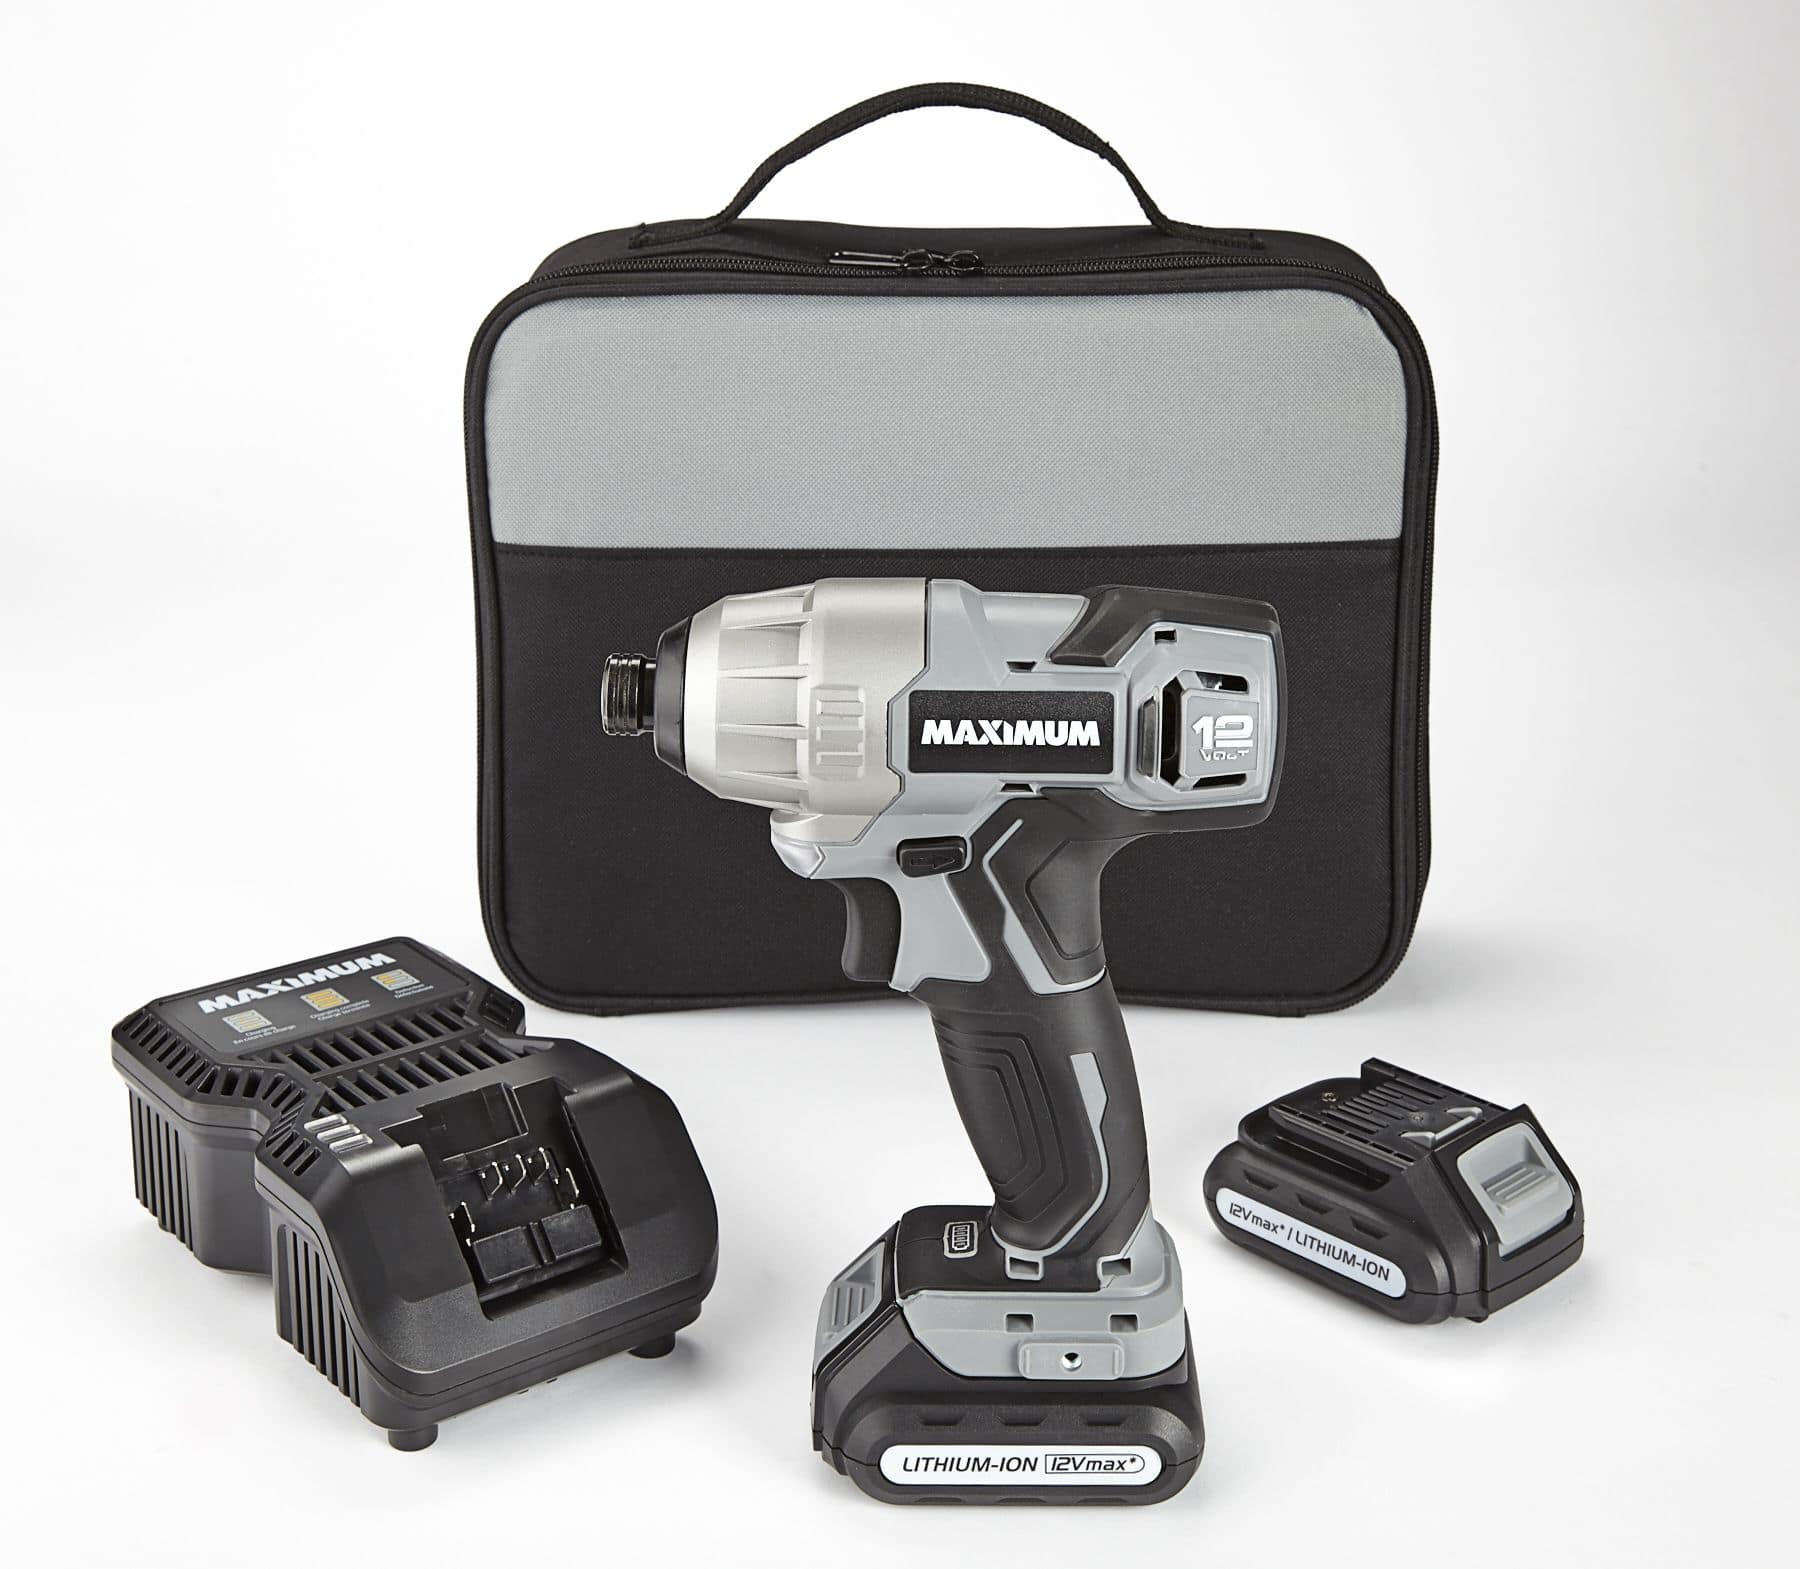 MAXIMUM 20V Max Lithium-Ion Cordless Impact Wrench with